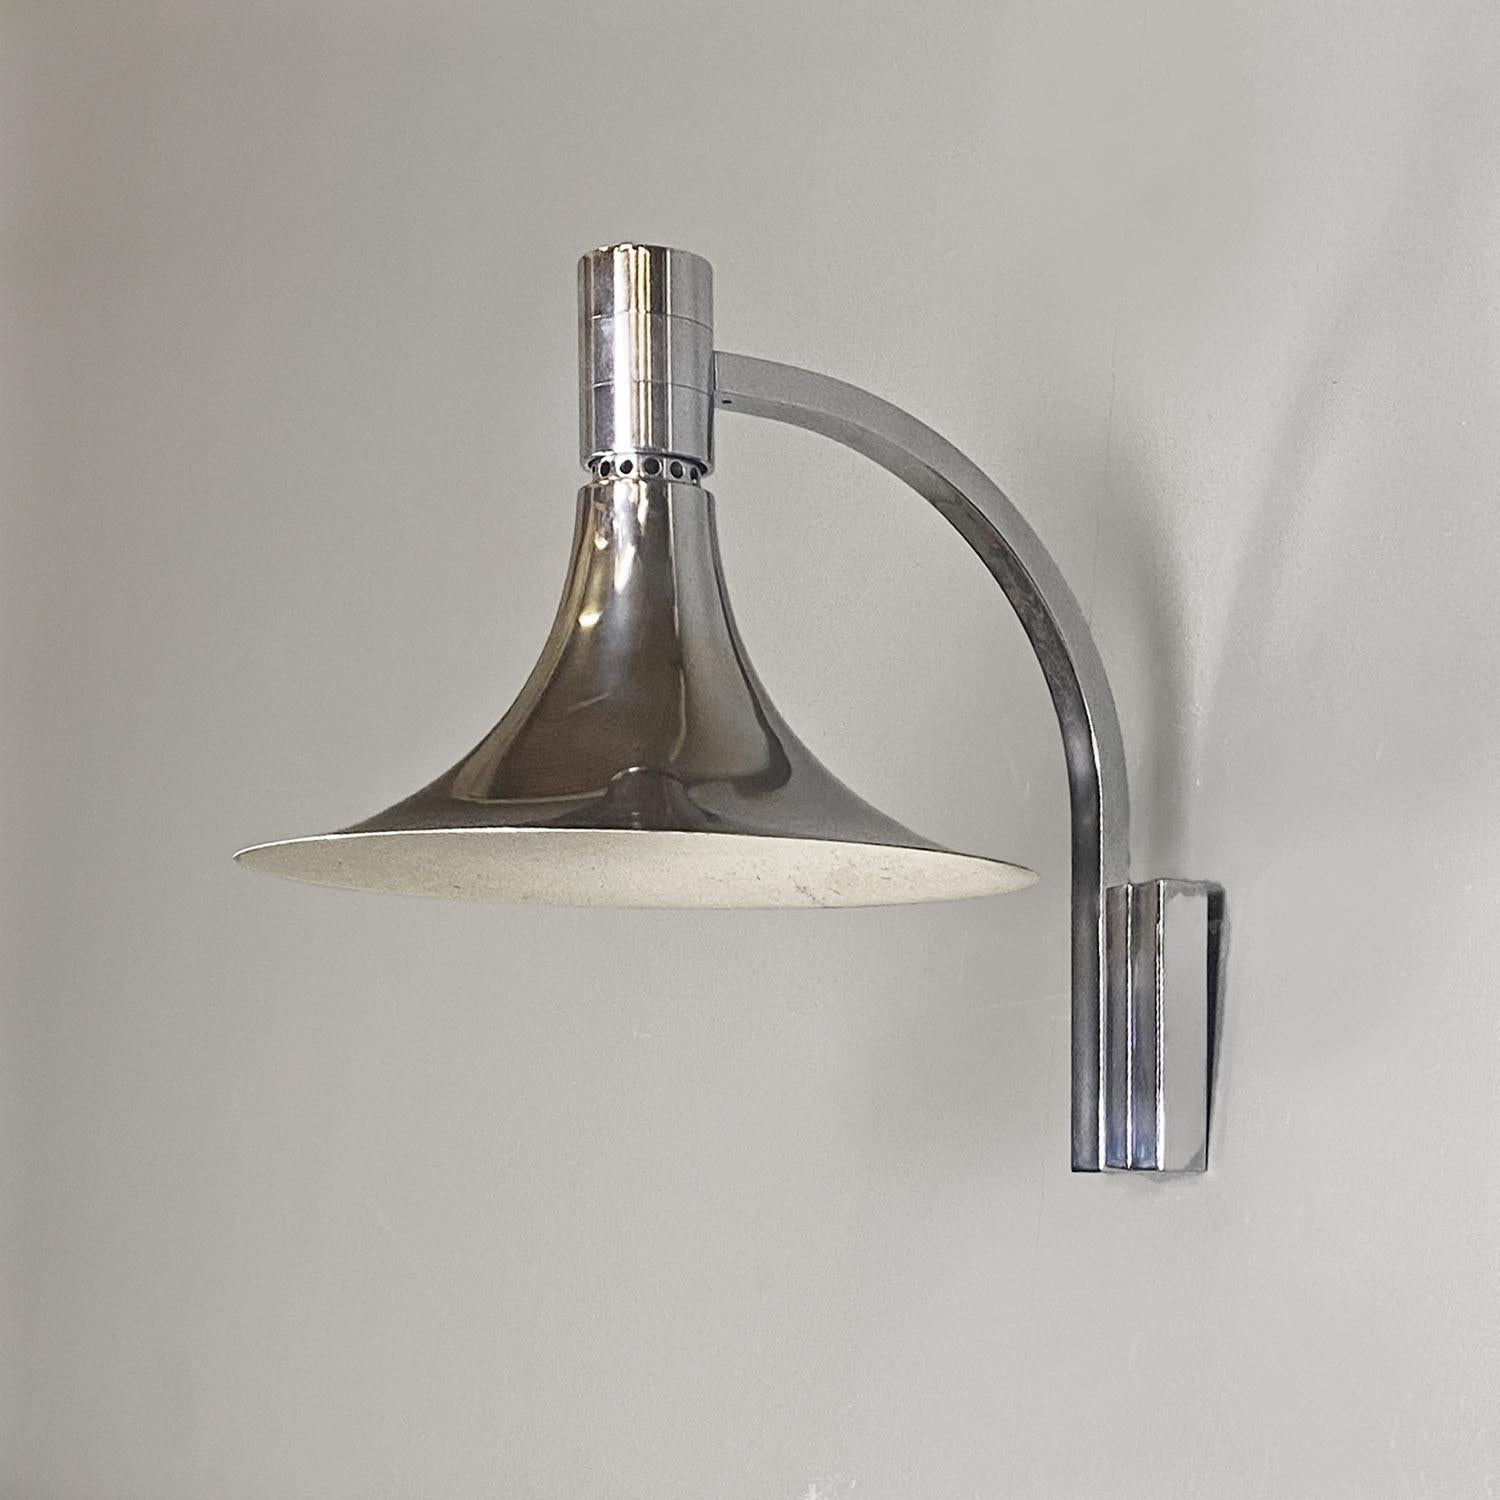 Steel AM/AS Italian wall lamp by Franco Albini and Franca Helg for SIrrah, 1969 For Sale